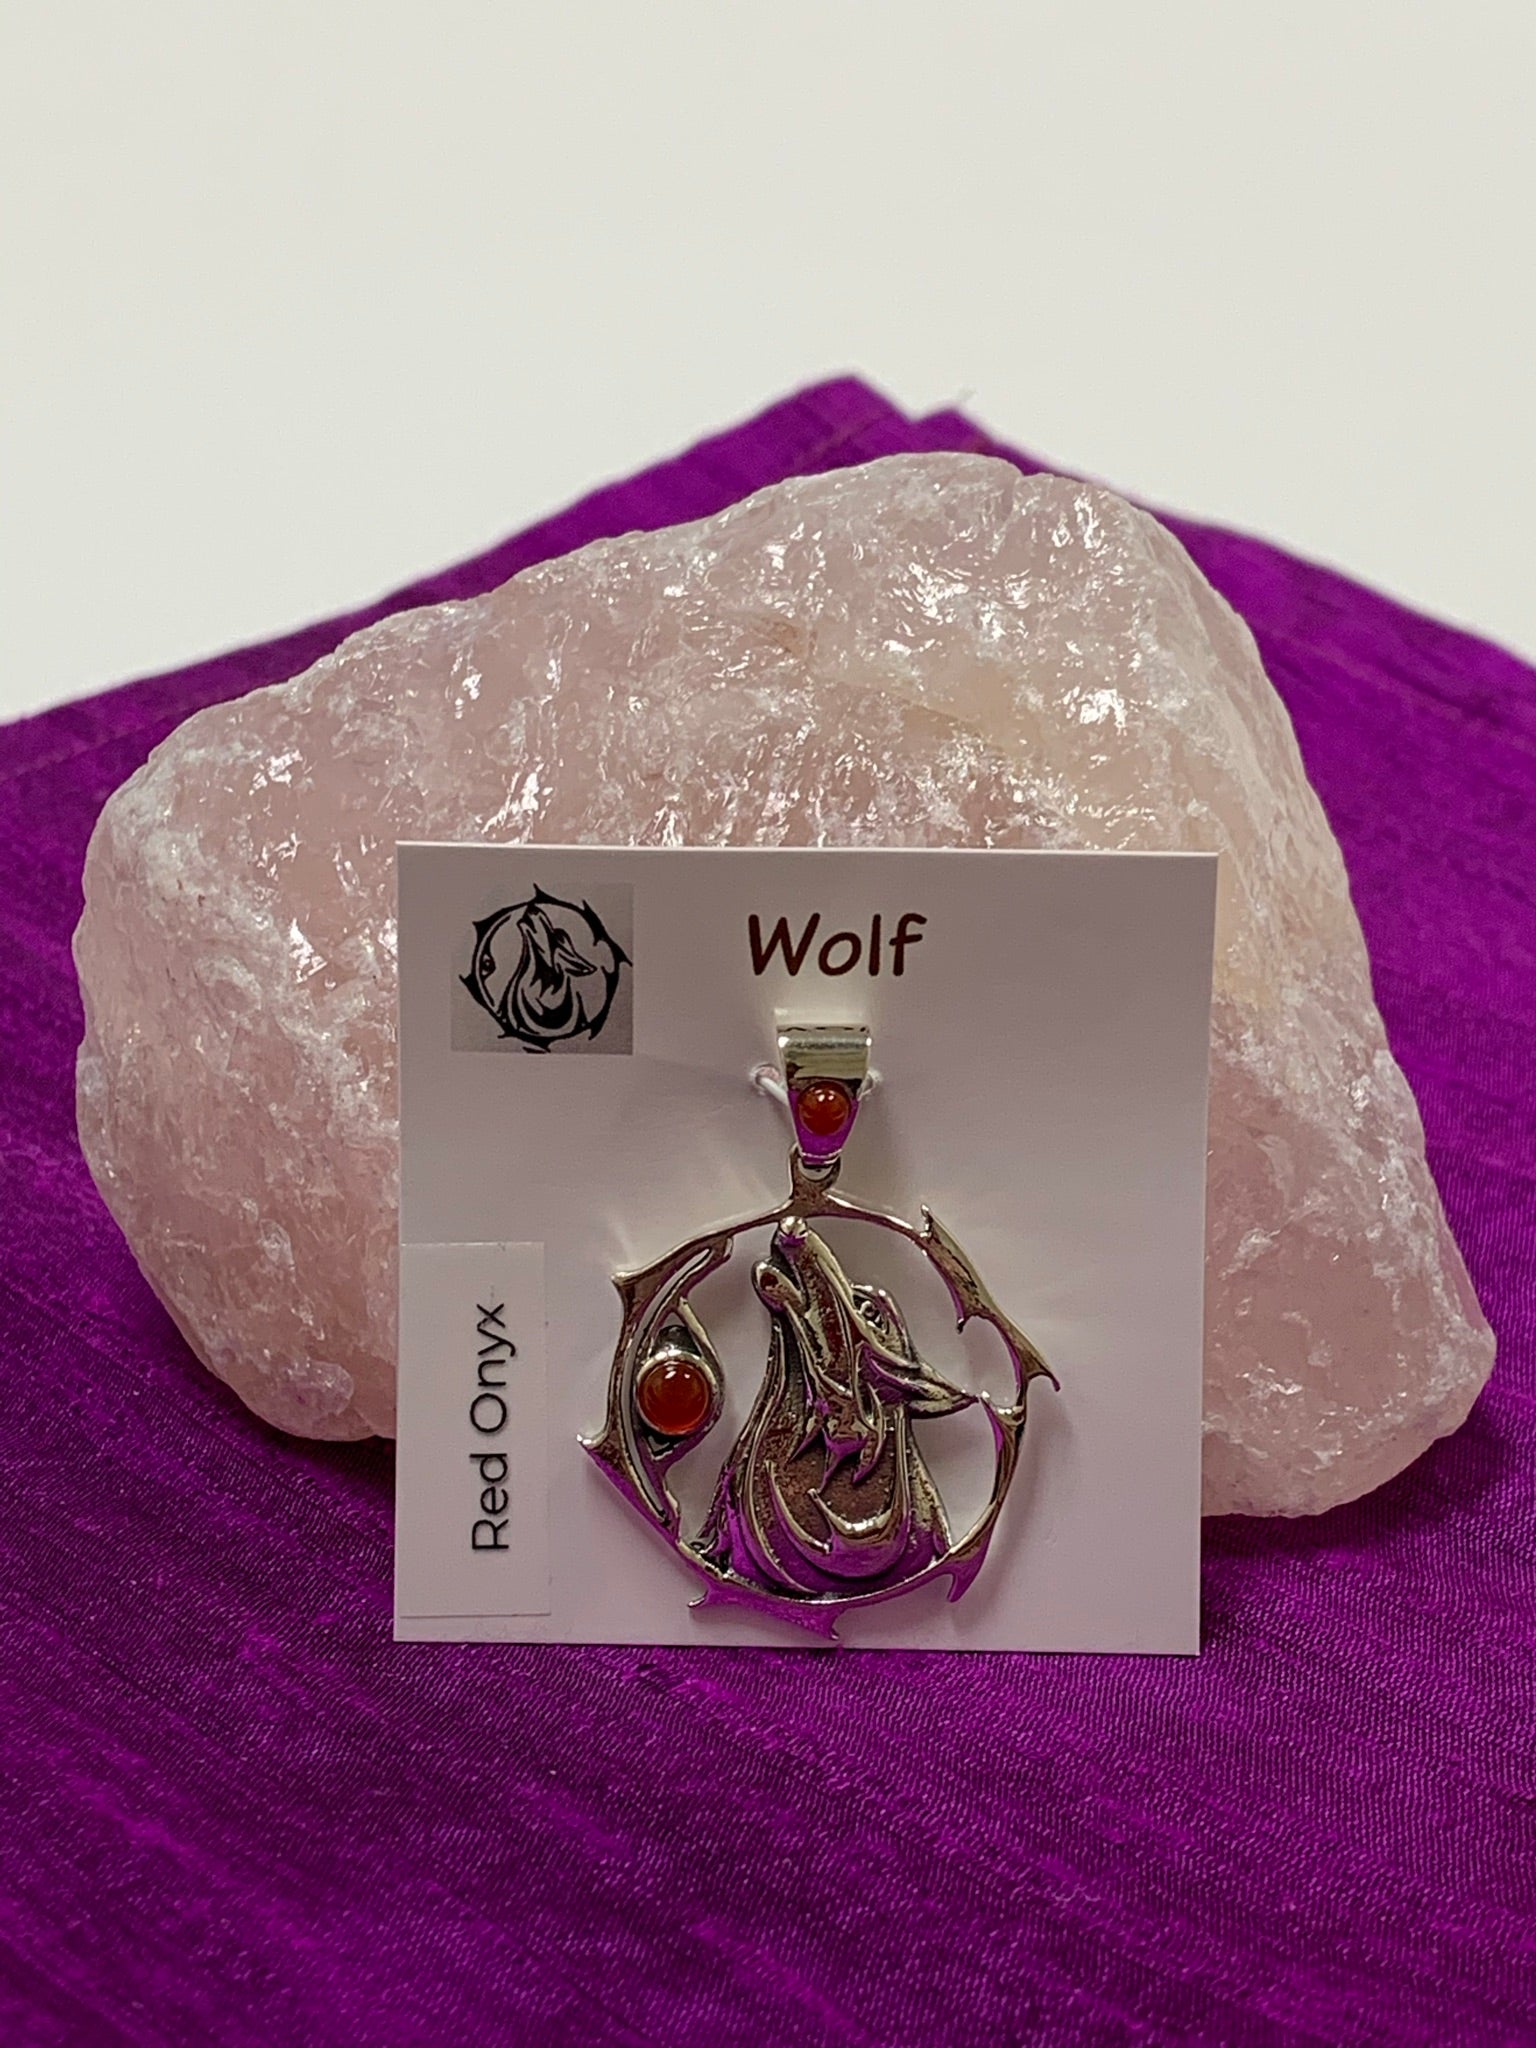 Sterling Silver wolf spirit animal pendant. Howling wolf (head and part of body) inside a fancy, stylized circle. Two red onyx gemstones (cabs), one on the actual pendant and one on the bail. Wear your spirit animal on your chest and carry it with you wherever you go! (Pendant only, no necklace chain).